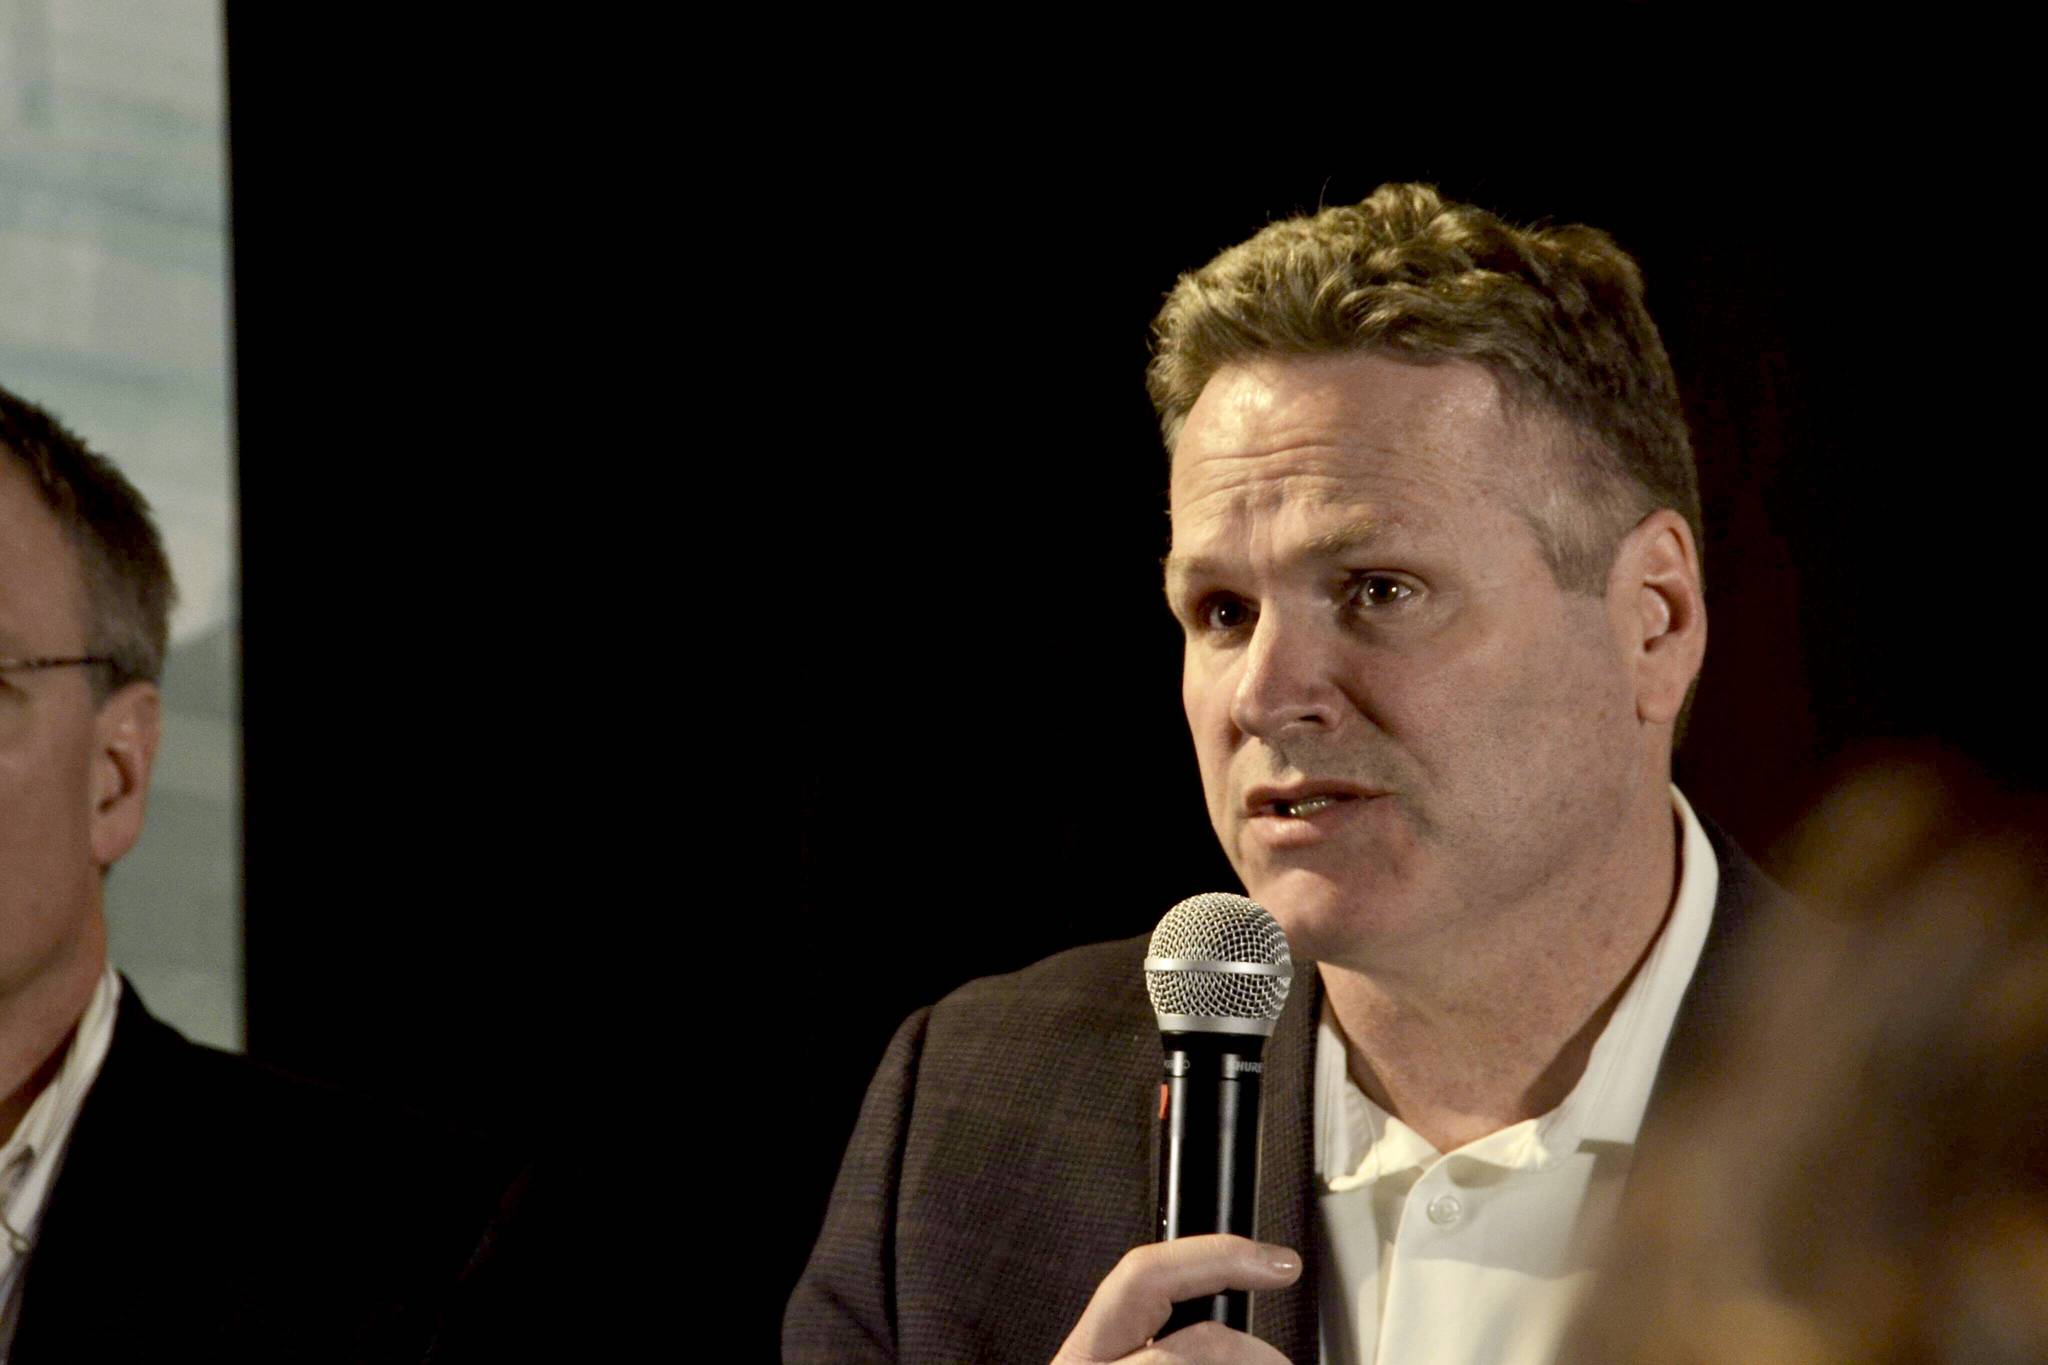 Gov. Mike Dunleavy gives a presentation about his proposed budget at the Cannery Lodge in Kenai, Alaska, on March 25, 2019. (Photo by Victoria Petersen/Peninsula Clarion)